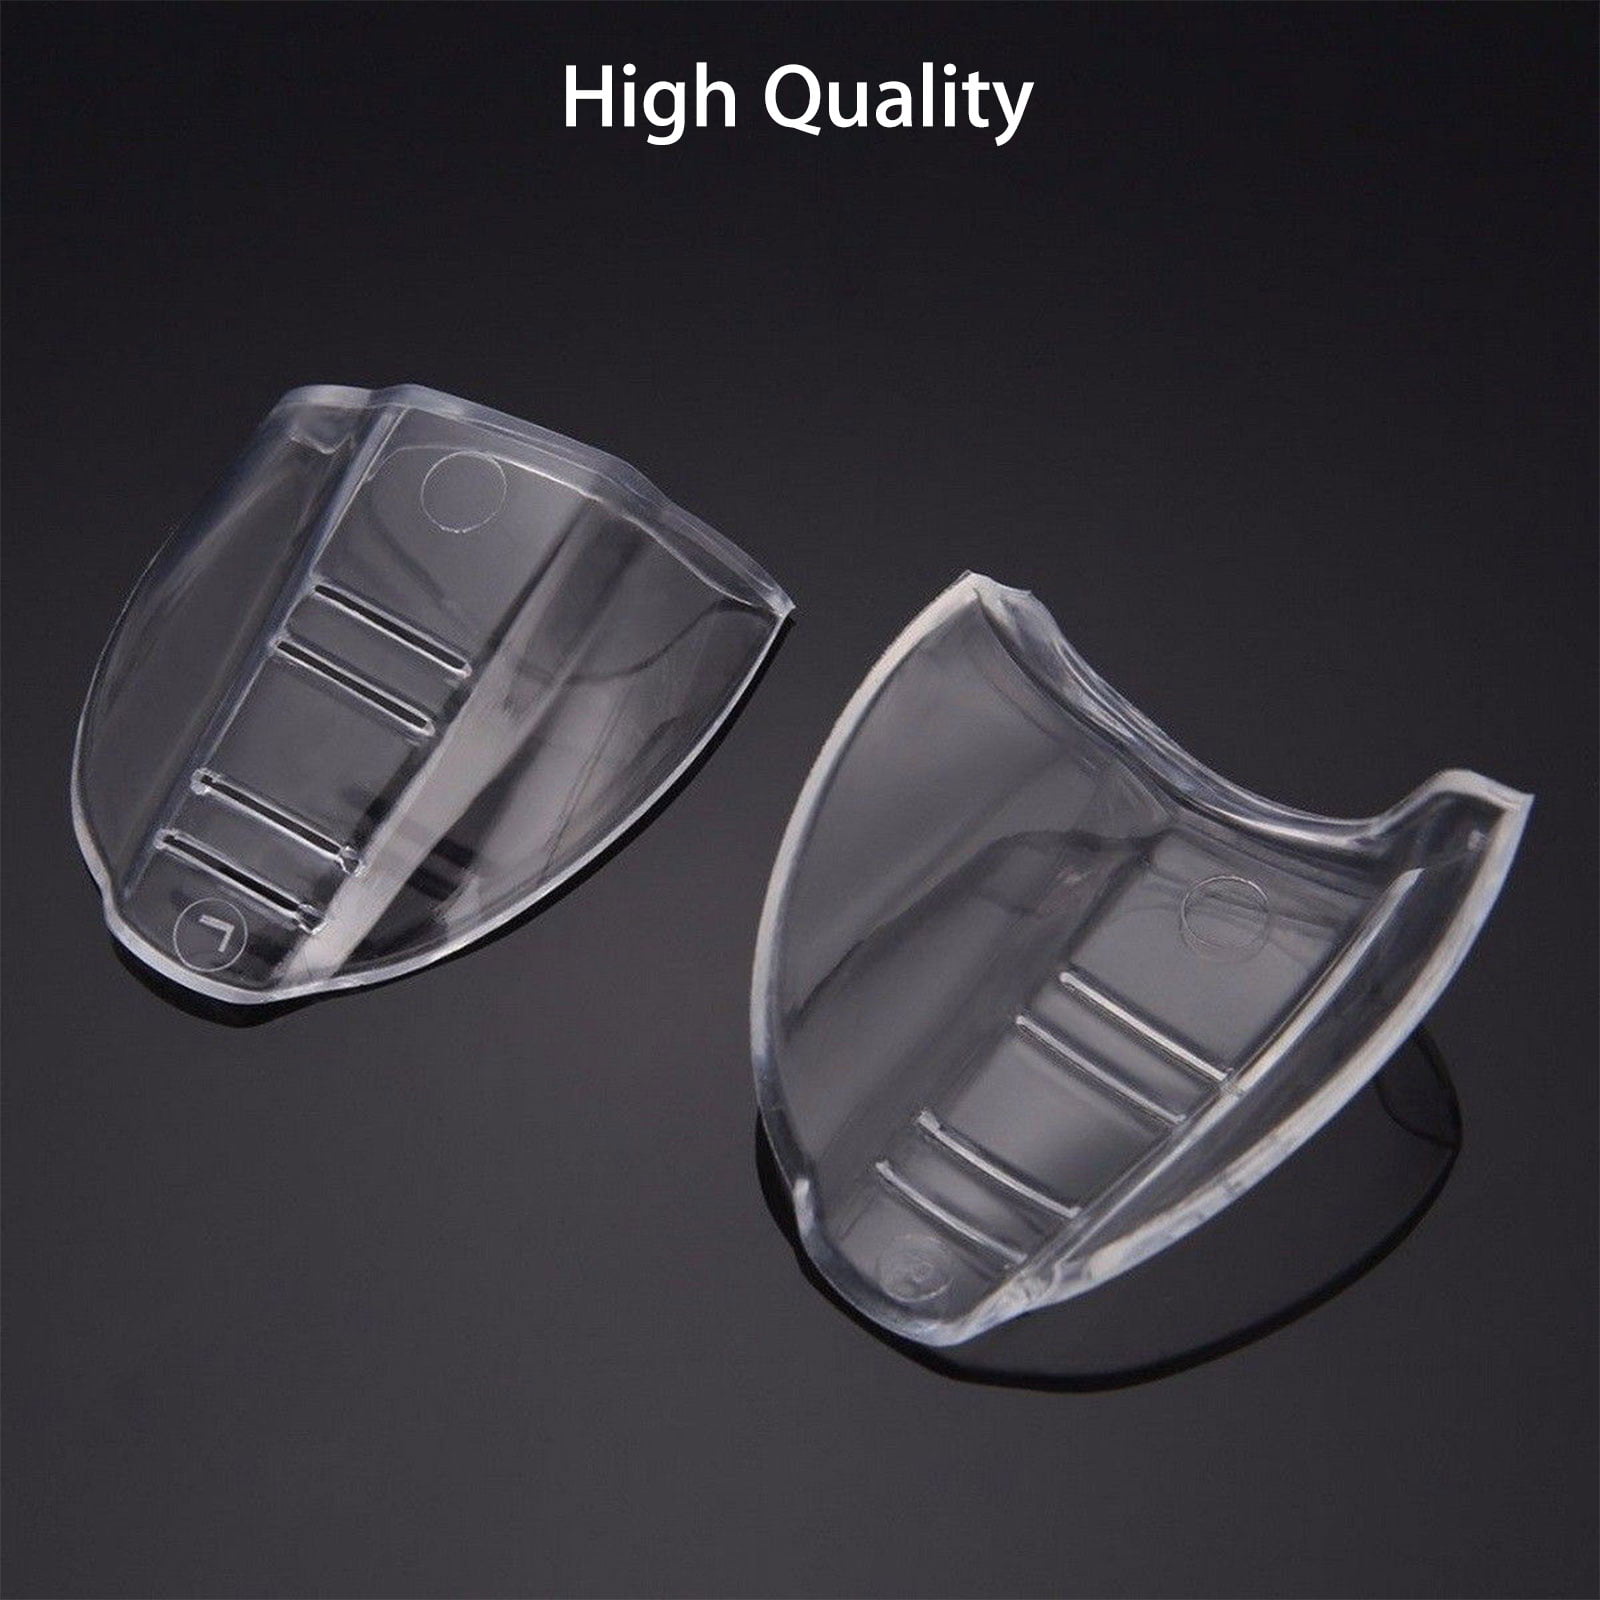 2x clear universal flexible side shields safety glasses goggles eye protects  PM